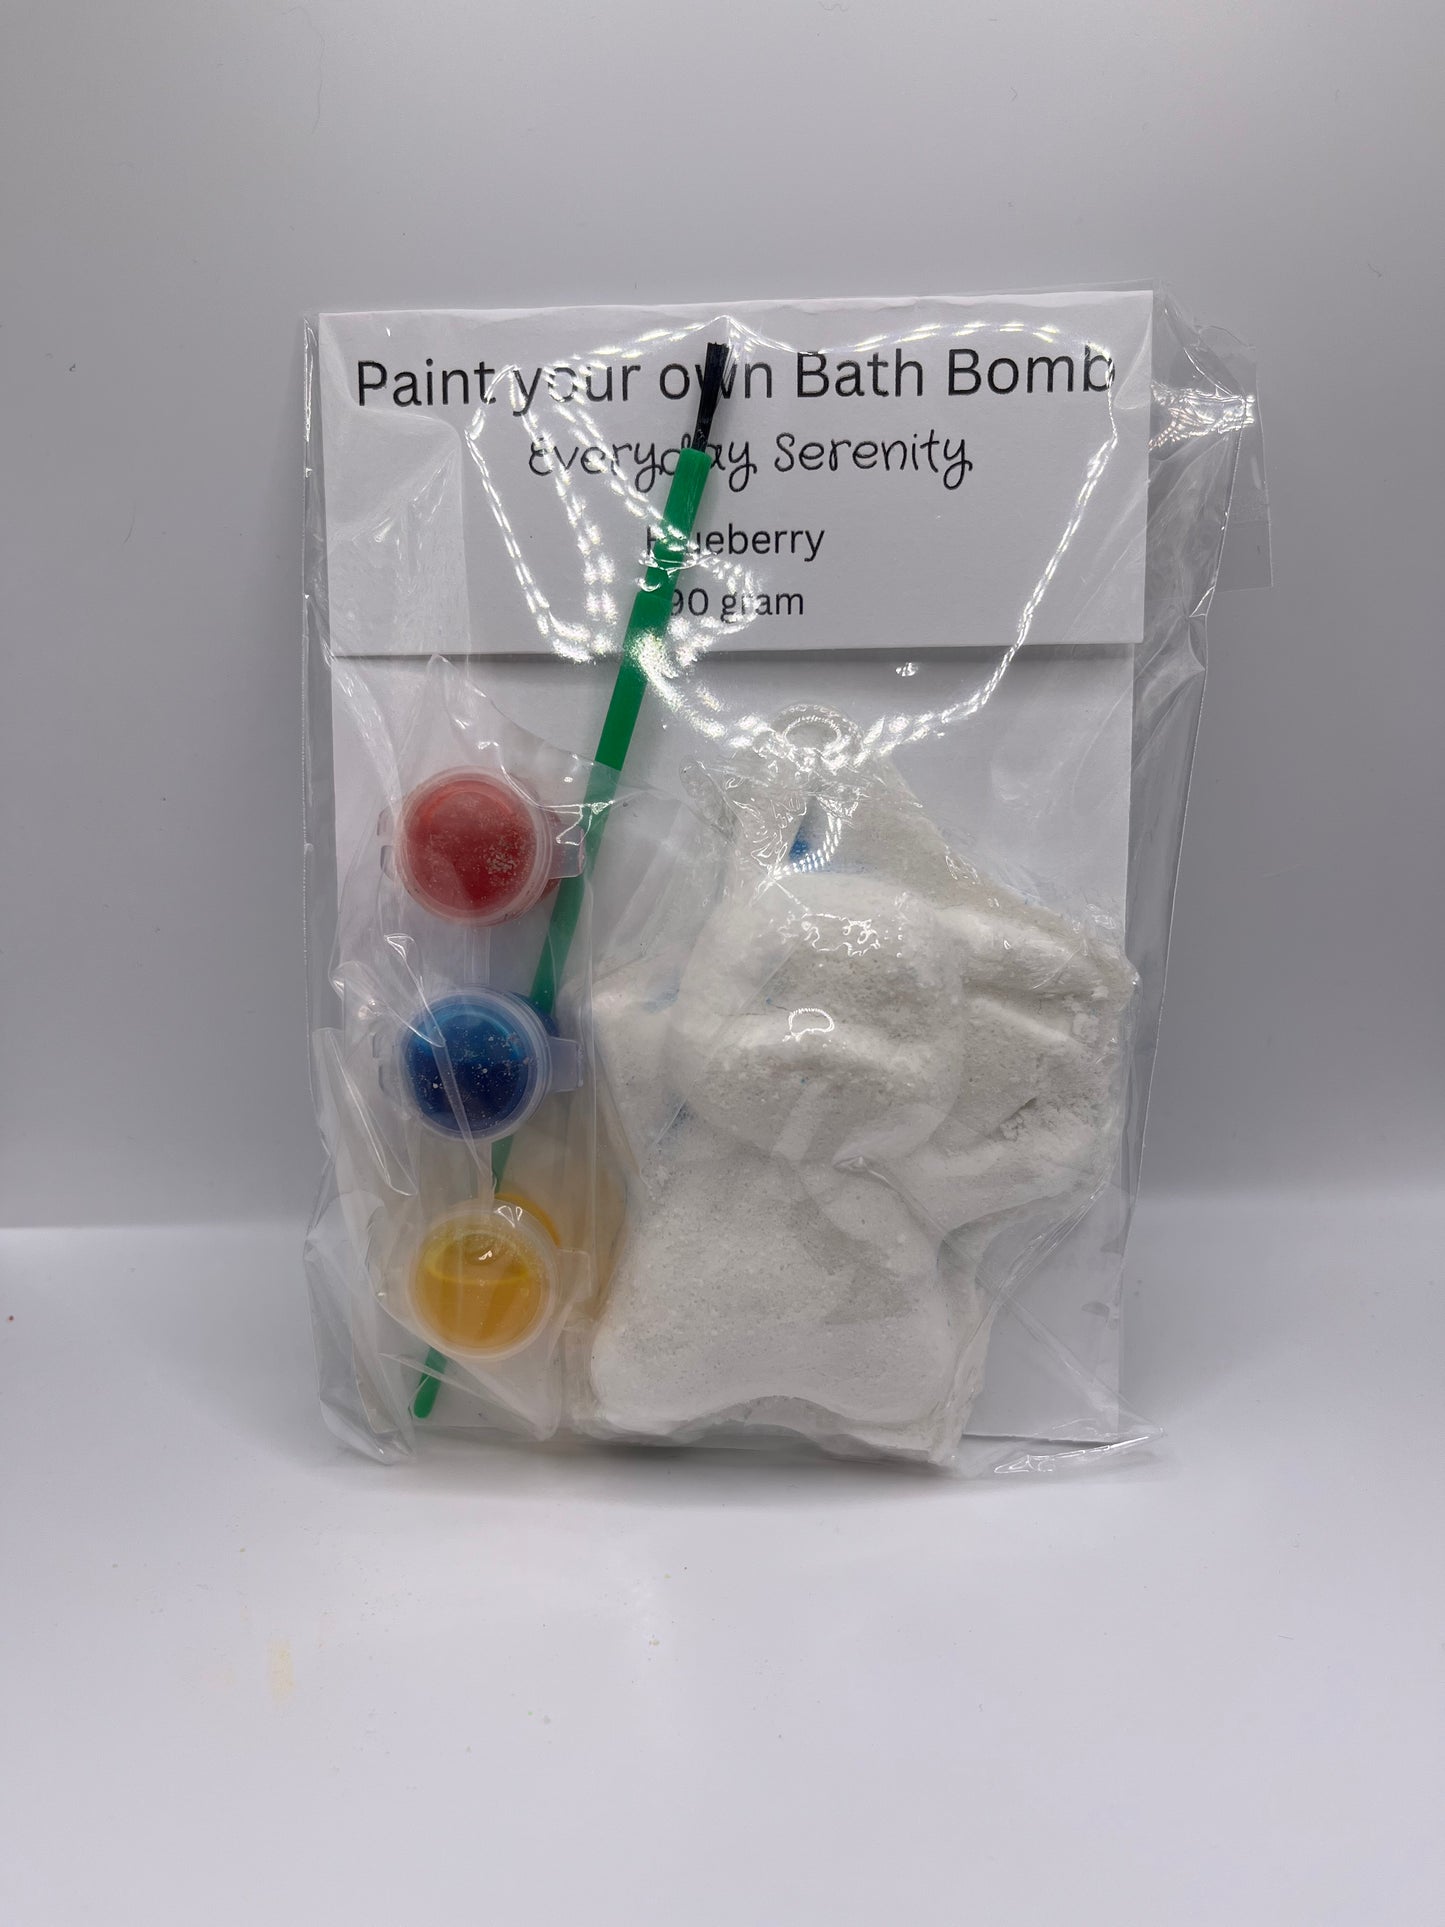 Paint your own bathbomb